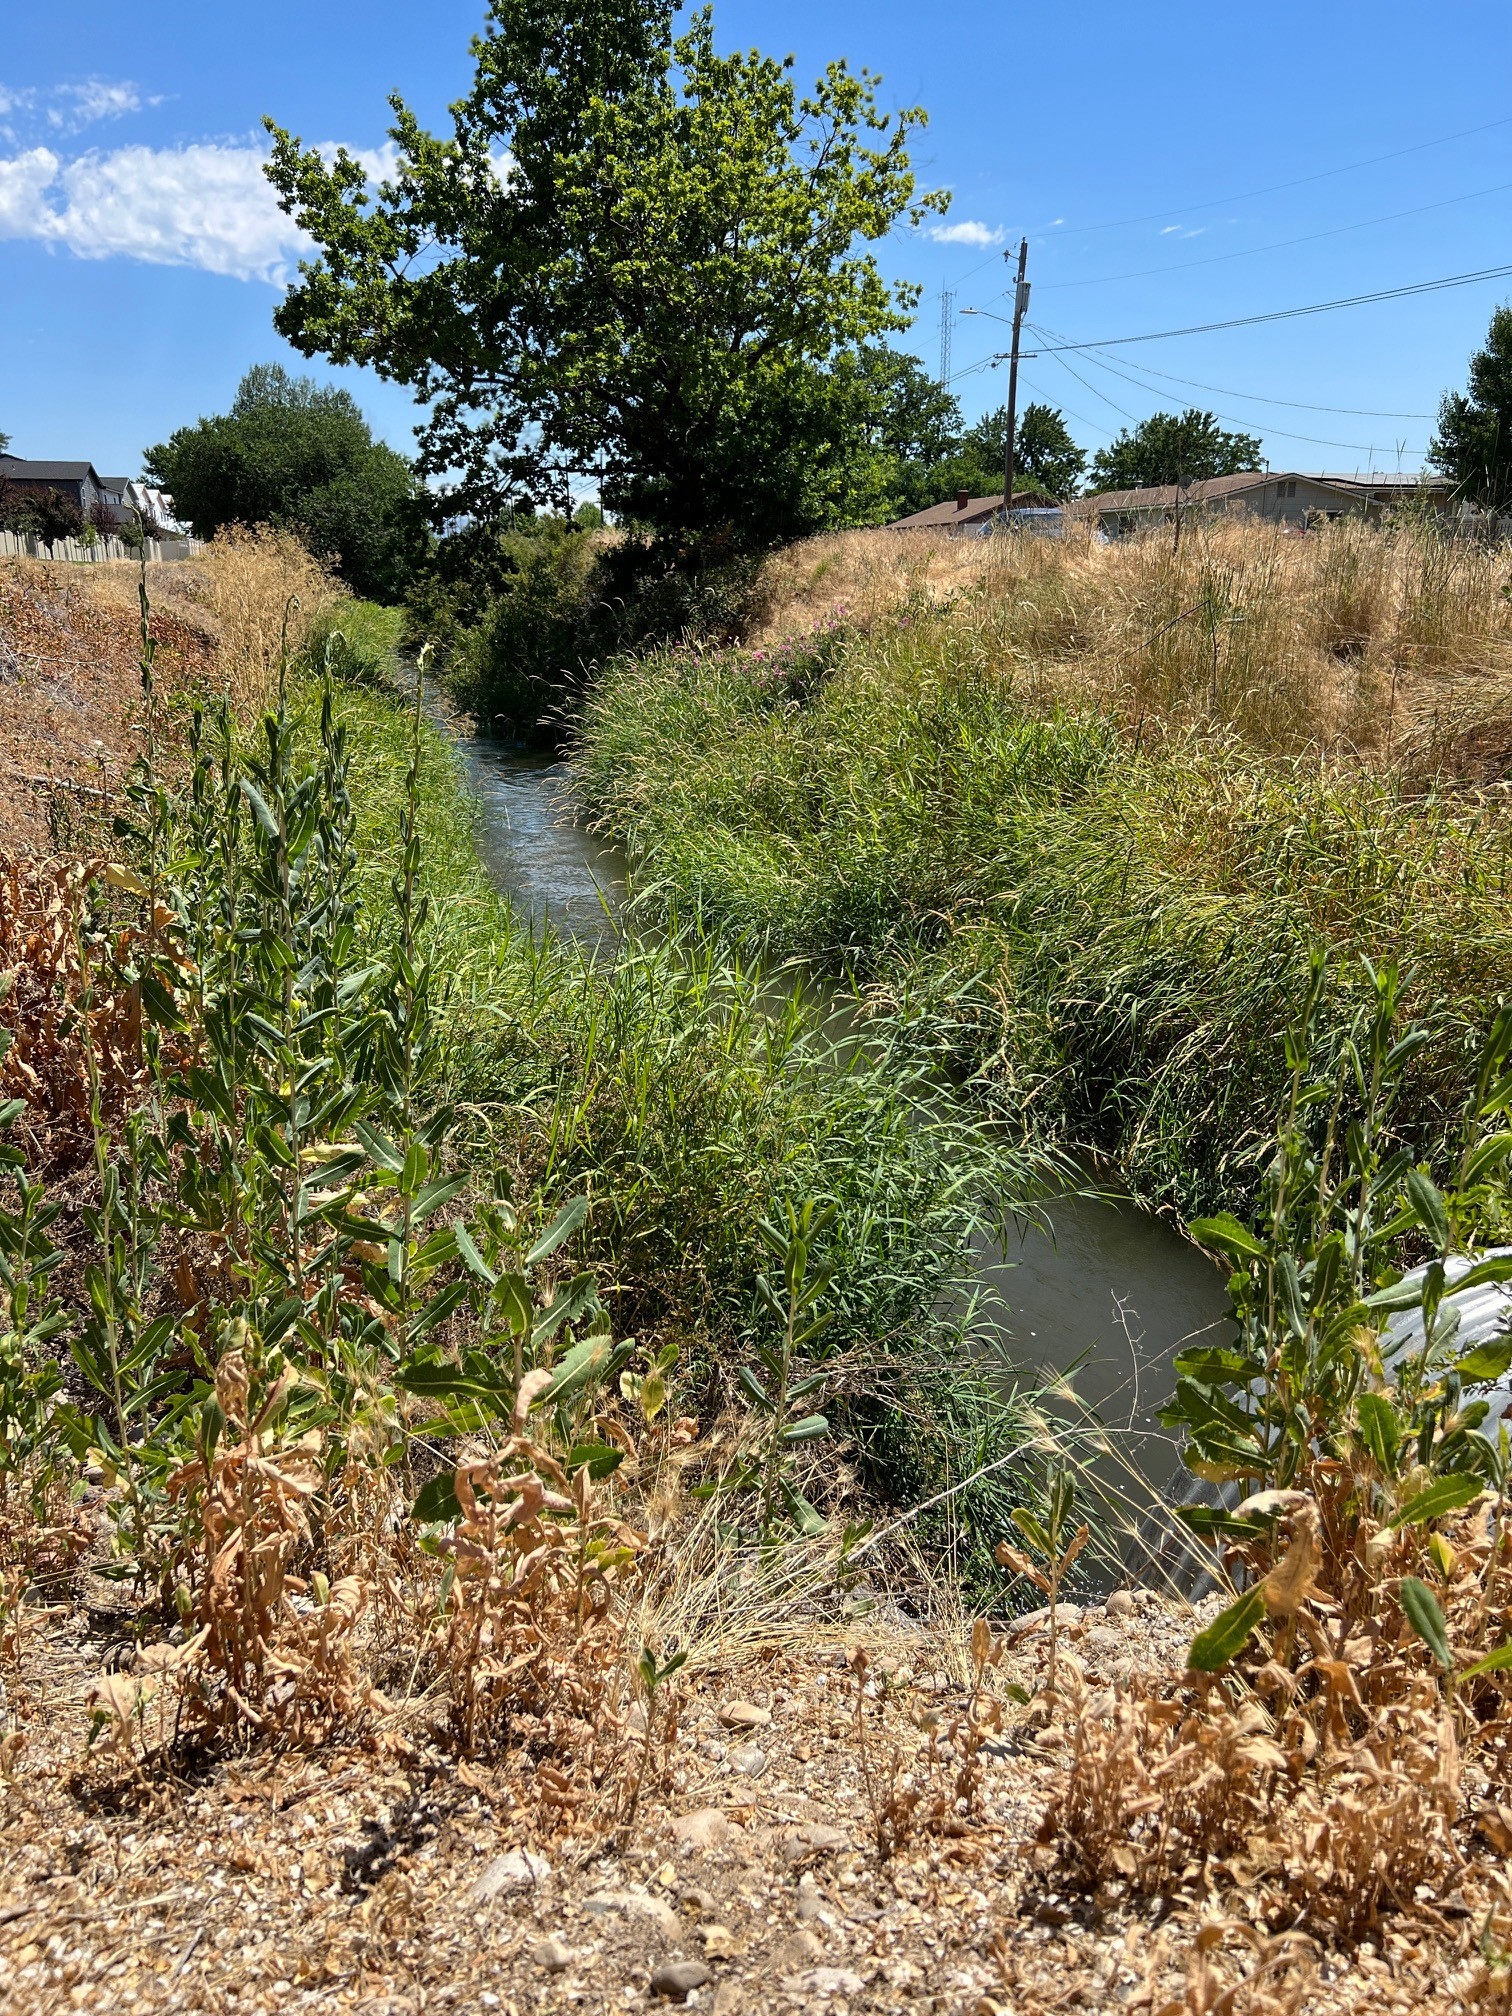 Irrigation ditch with water surrounded by grass and weeds